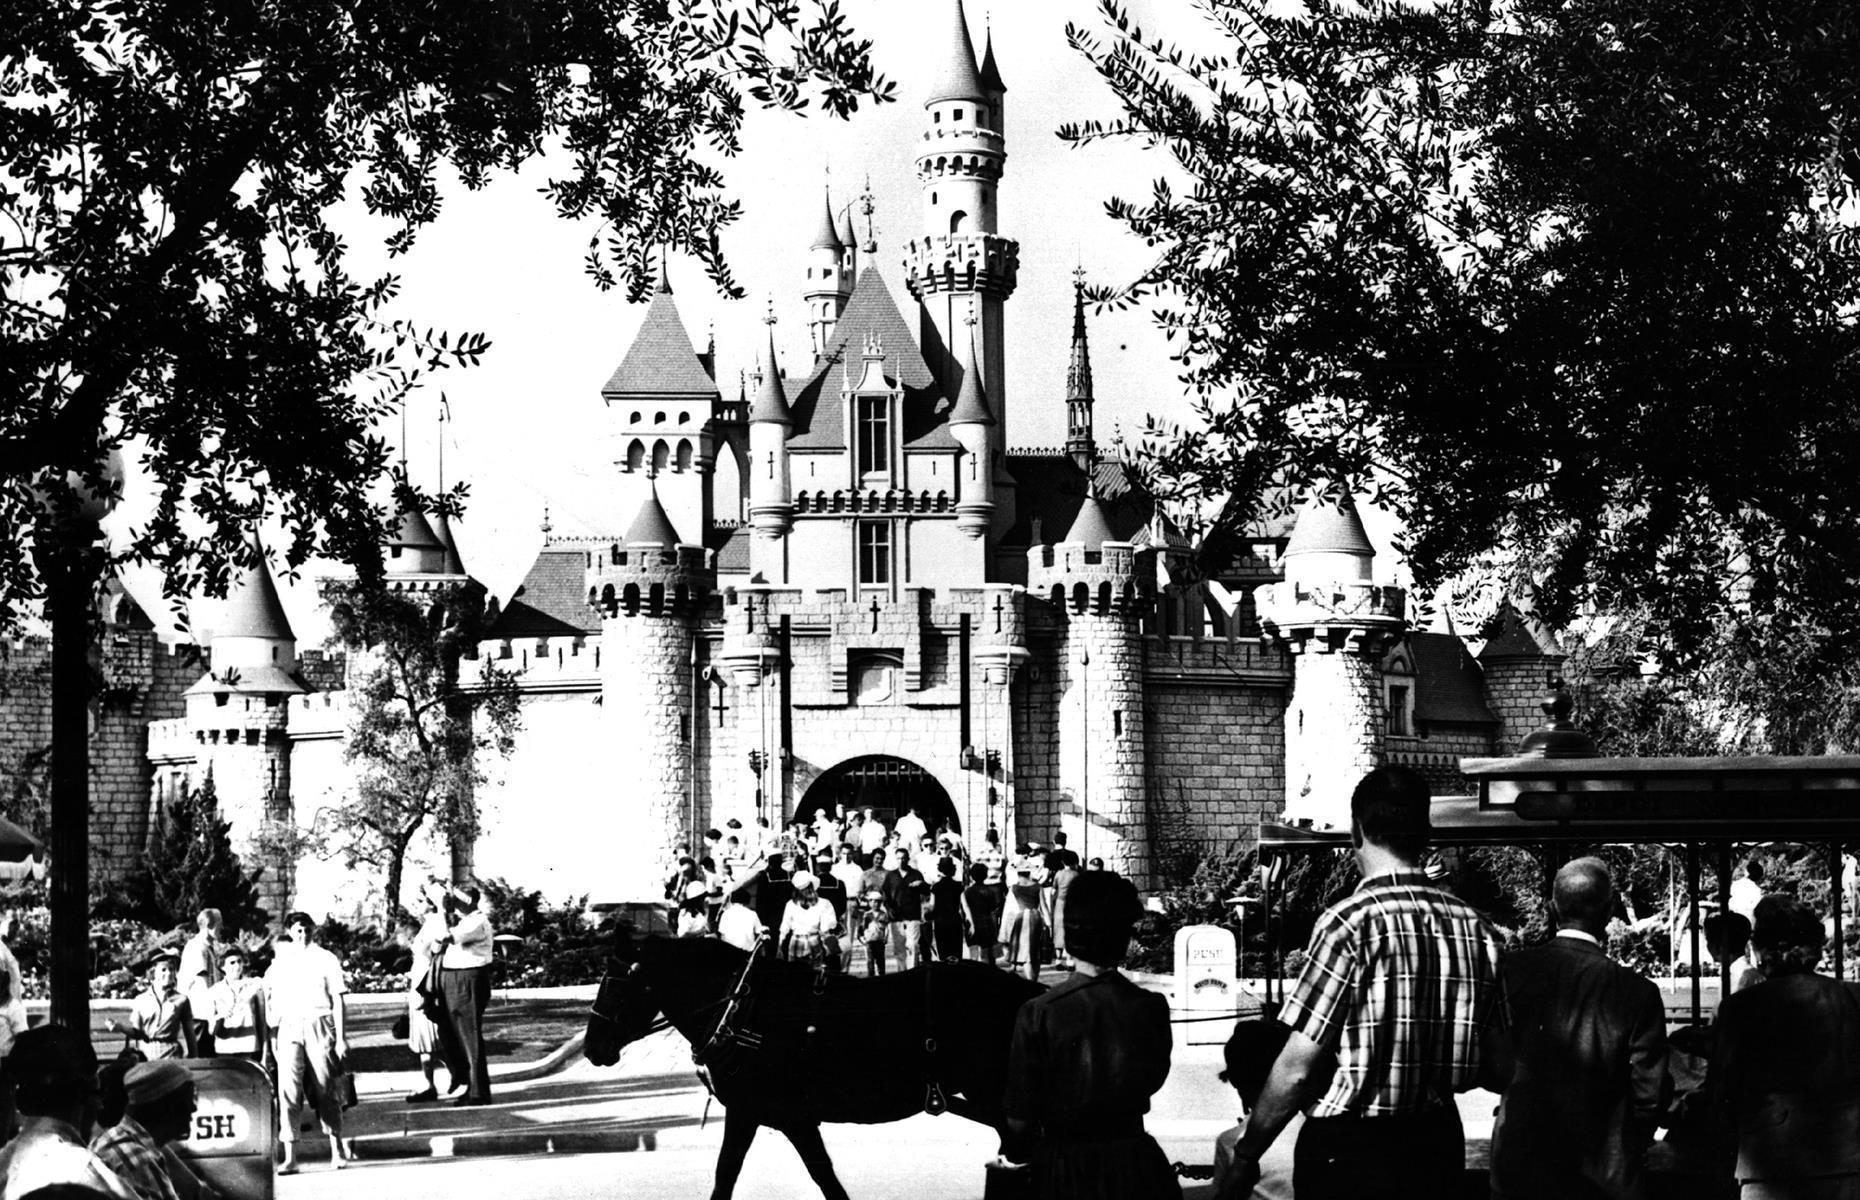 <p>Disneyland (renamed Disneyland Park in the 1990s) opened on 17 July 1955 and the Sleeping Beauty Castle, which is modelled on Neuschwanstein Castle in Bavaria, Germany, is its most recognisable attraction. It’s been popular since the get-go, receiving 28,000 people on its opening day – some were so desperate to get in that they jumped the fence. This picture shows its popularity continued well into the 1960s, as tourists surround the fairy-tale fortress, and it's no different today in normal circumstances (<a href="https://disneyland.disney.go.com/experience-updates/">currently closed due to COVID-19</a>). <a href="https://www.loveexploring.com/galleries/83822/magic-kingdoms-historic-pictures-of-disneys-parks?page=1">See more historic pictures of Disney's parks here</a>.</p>